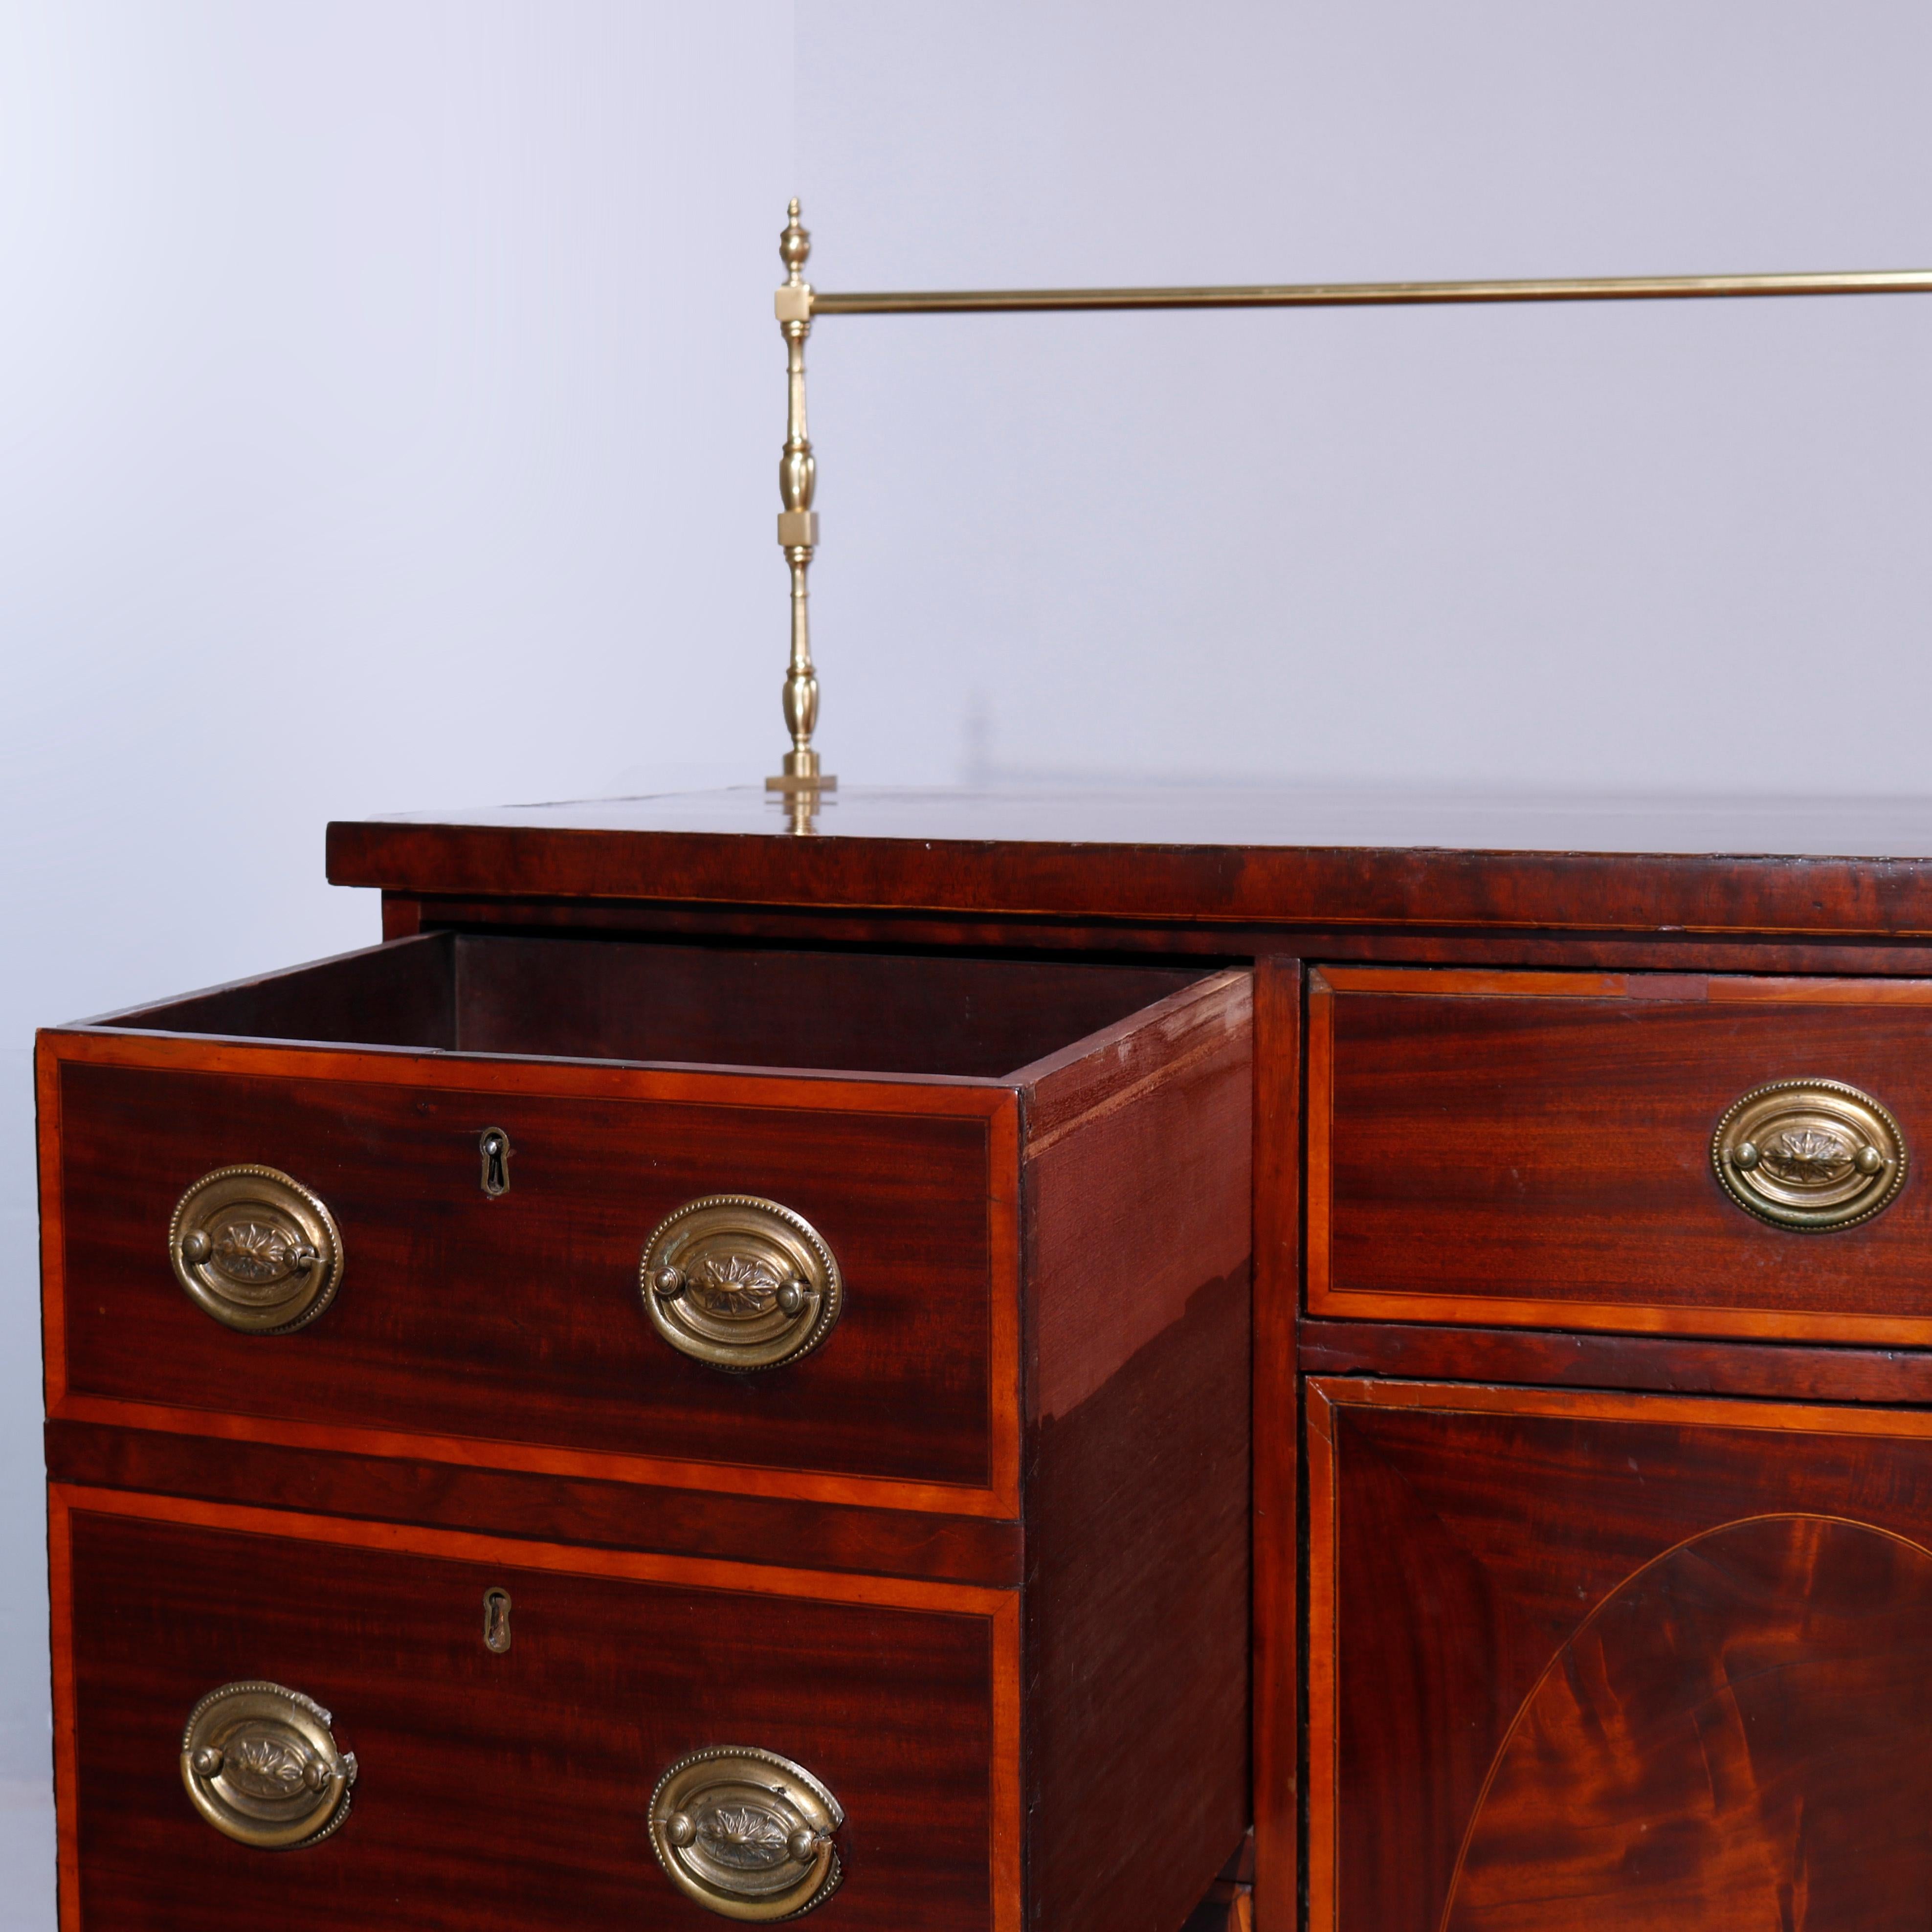 An antique English Georgian sideboard offers flame mahogany construction with brass plate rail and bow front having drawers and cabinets with inlaid reserves and satinwood banding, raised on bracket feet, c1810

Measures - 55''H x 65.75''W x